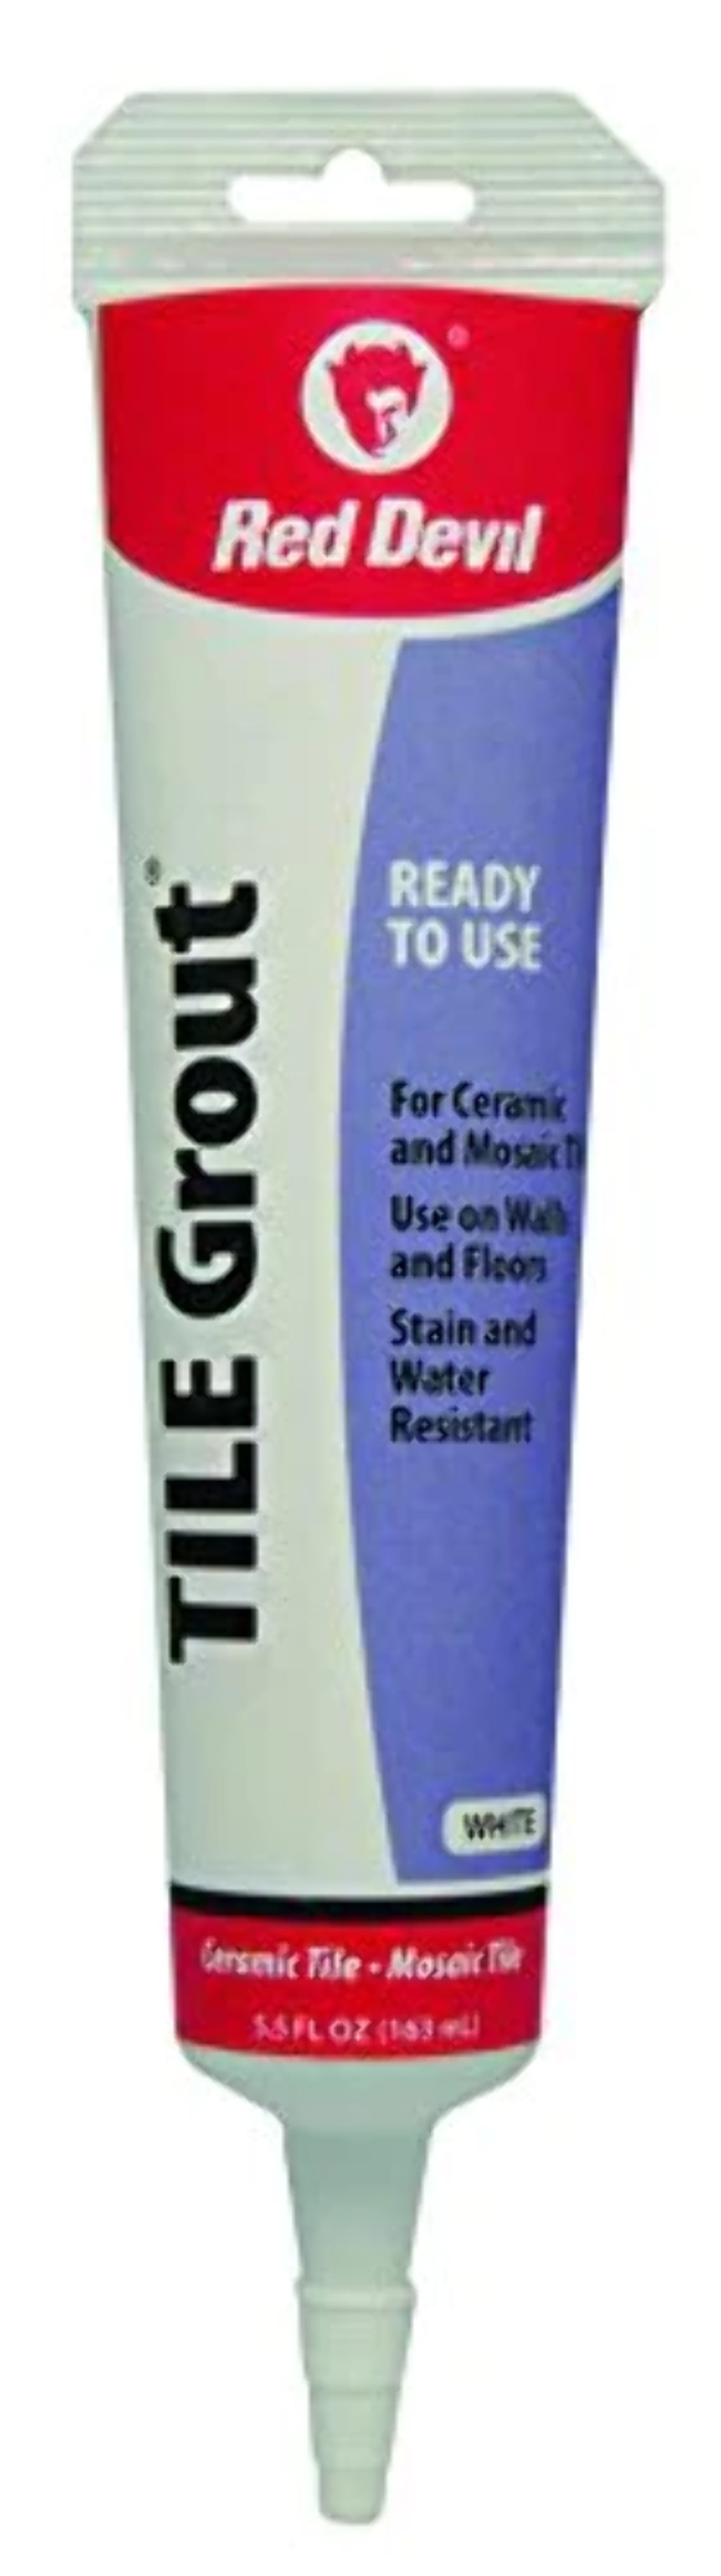 Magic 4 oz. Grout Restore Kit with Premixed Grout and Saw 3013